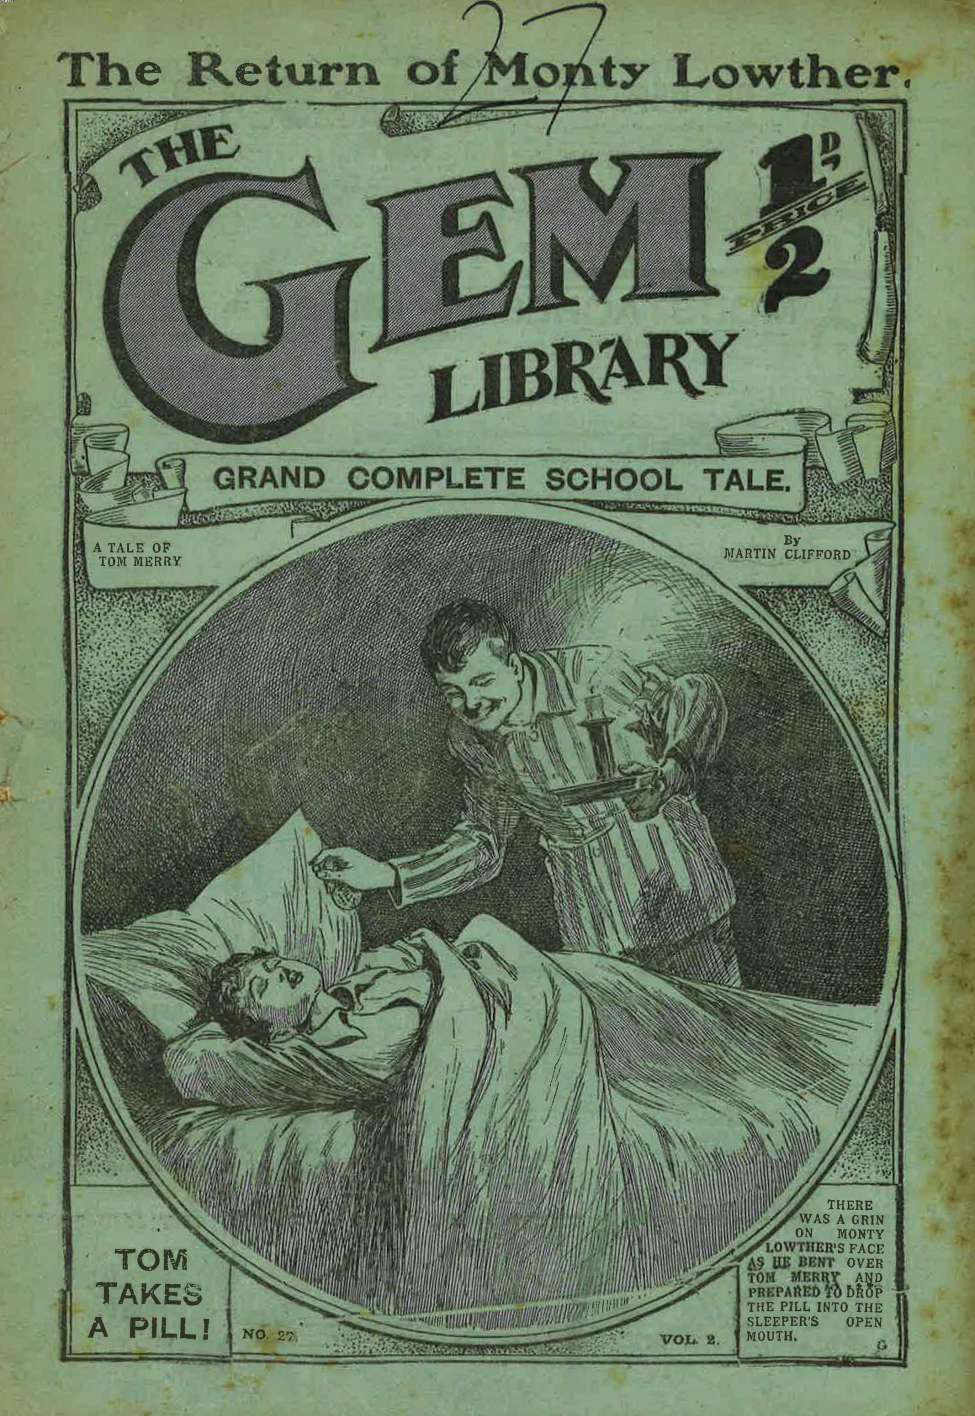 Book Cover For The Gem v1 27 - The Return of Monty Lowther